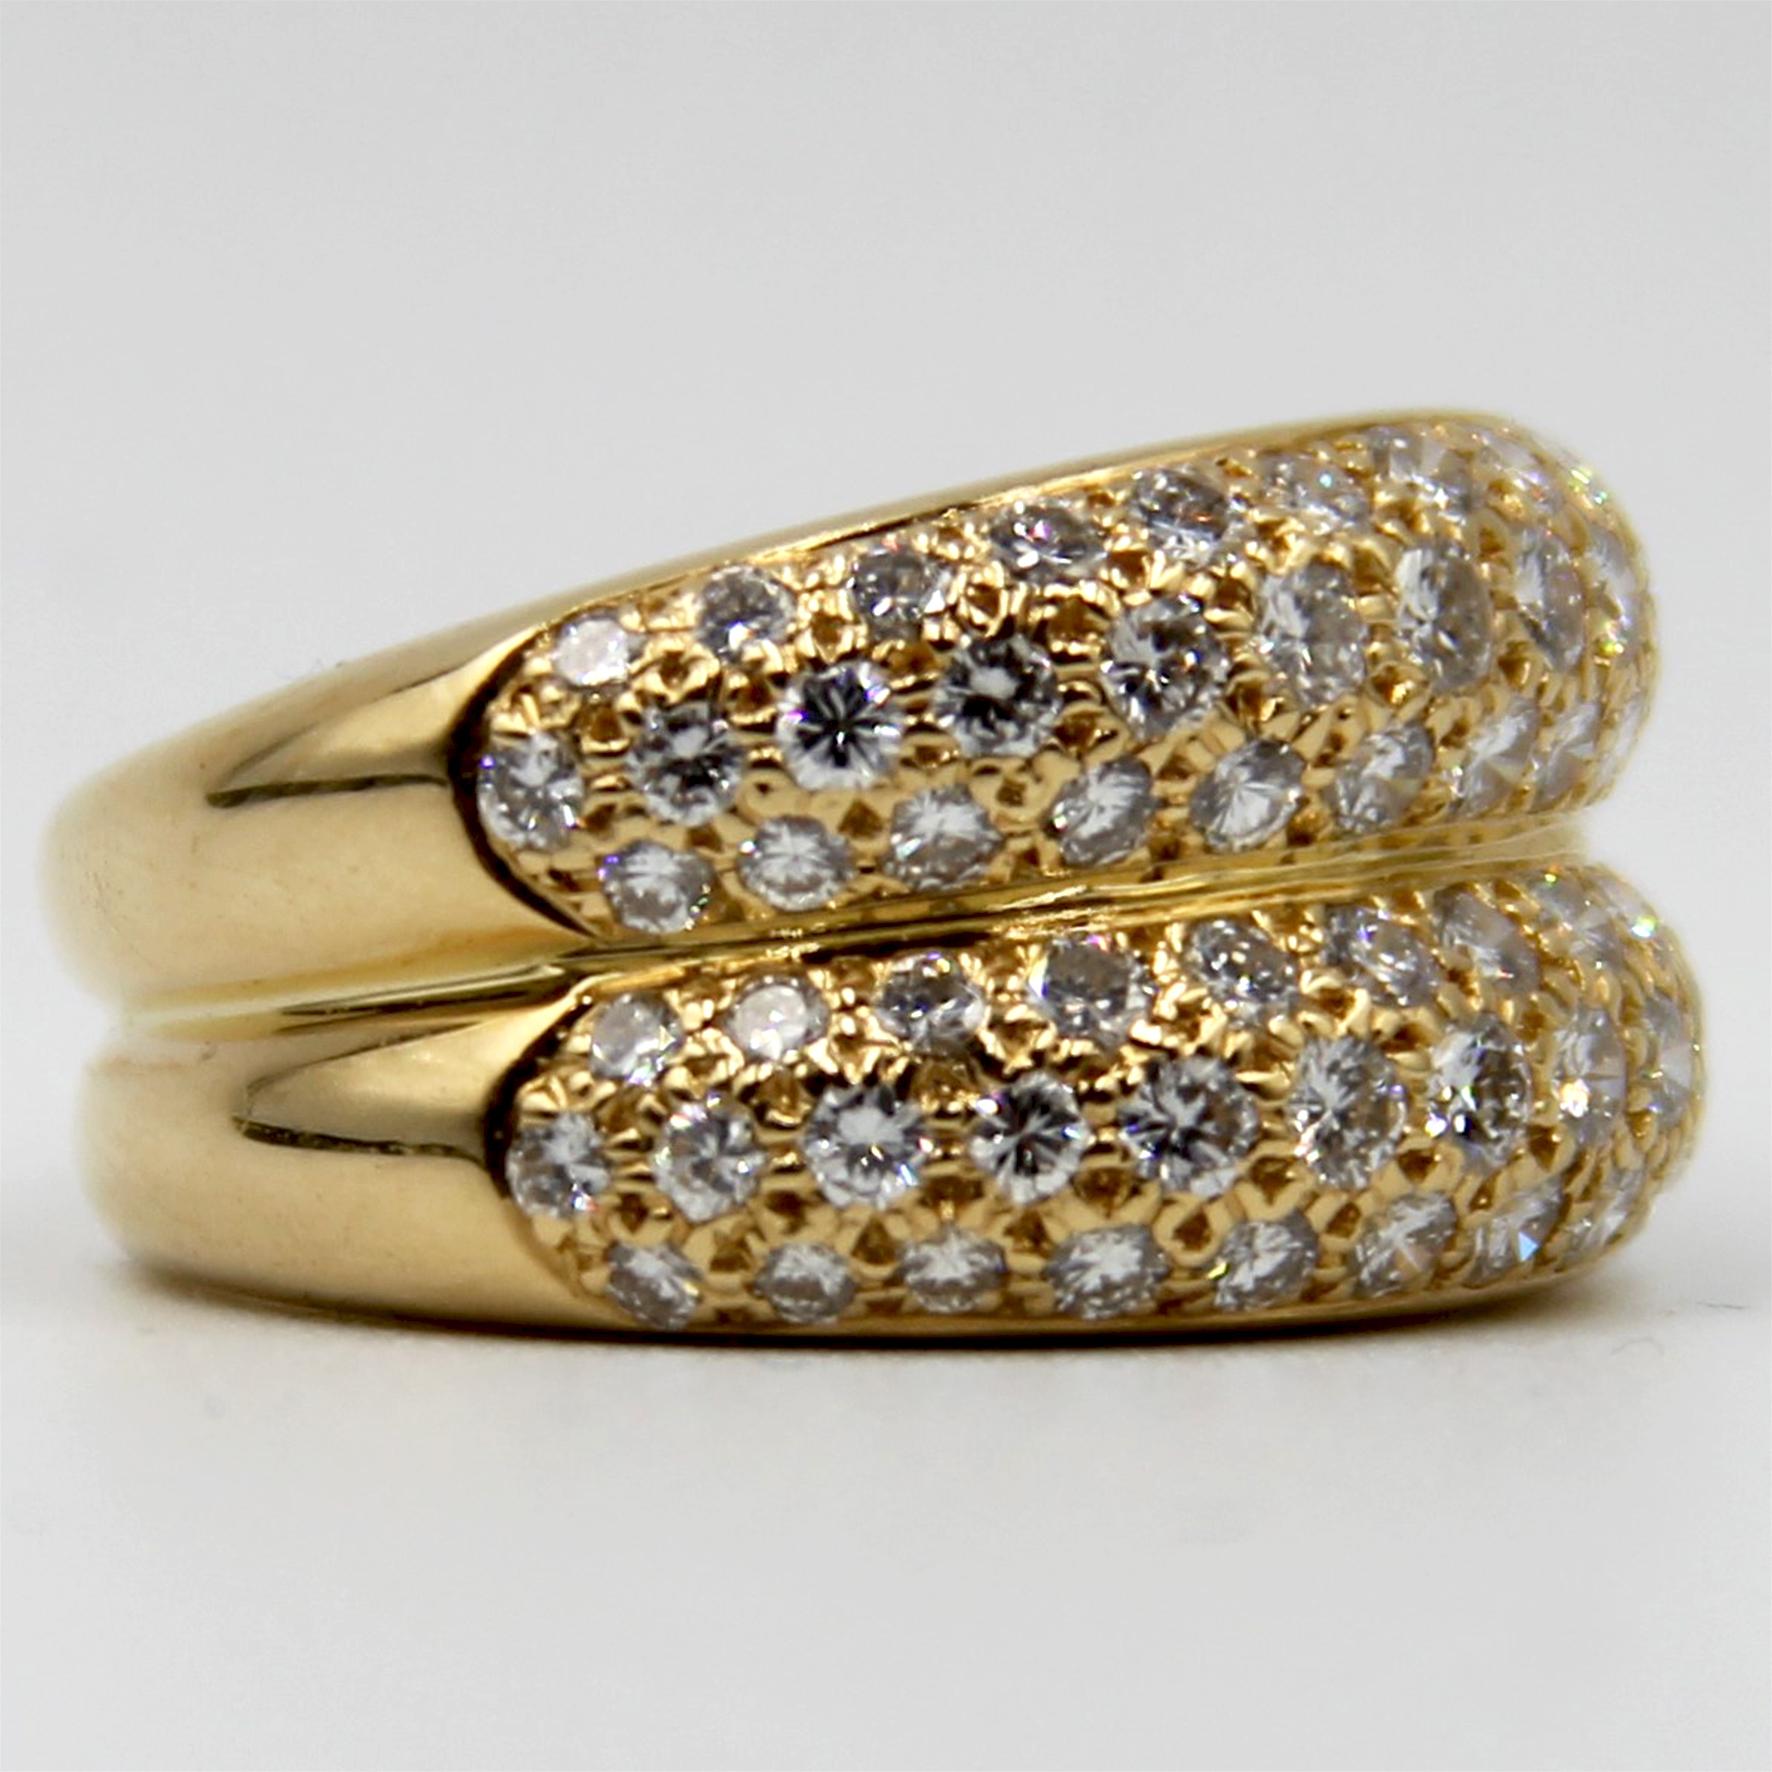 Cartier 2.50 Carat Diamond Bombe 18k Gold Ring In Fair Condition For Sale In Istanbul, TR